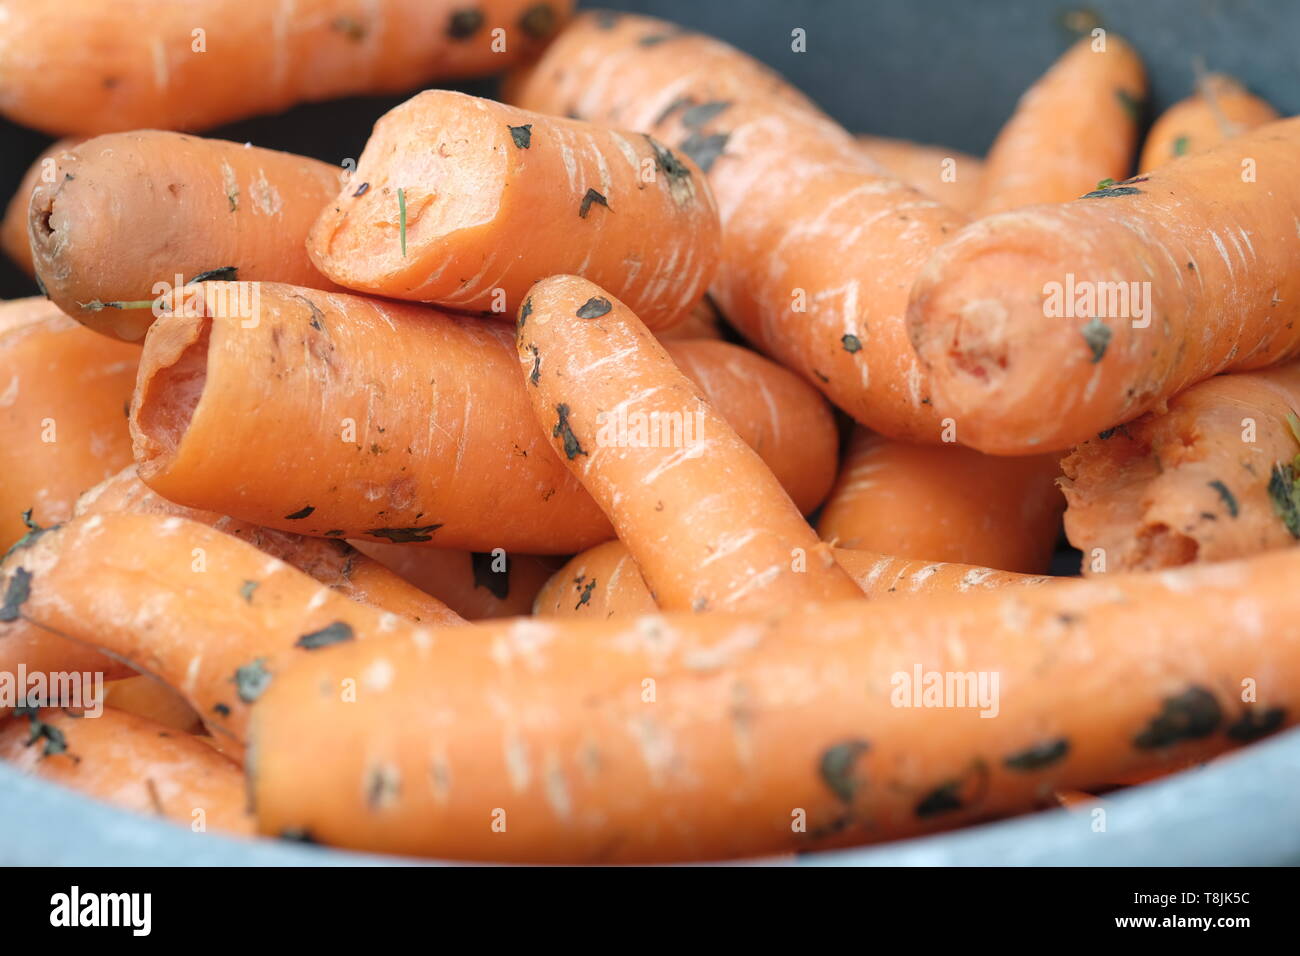 Bowl of wonky and soil stained carrots destined for equine feed and not for human consumption Stock Photo